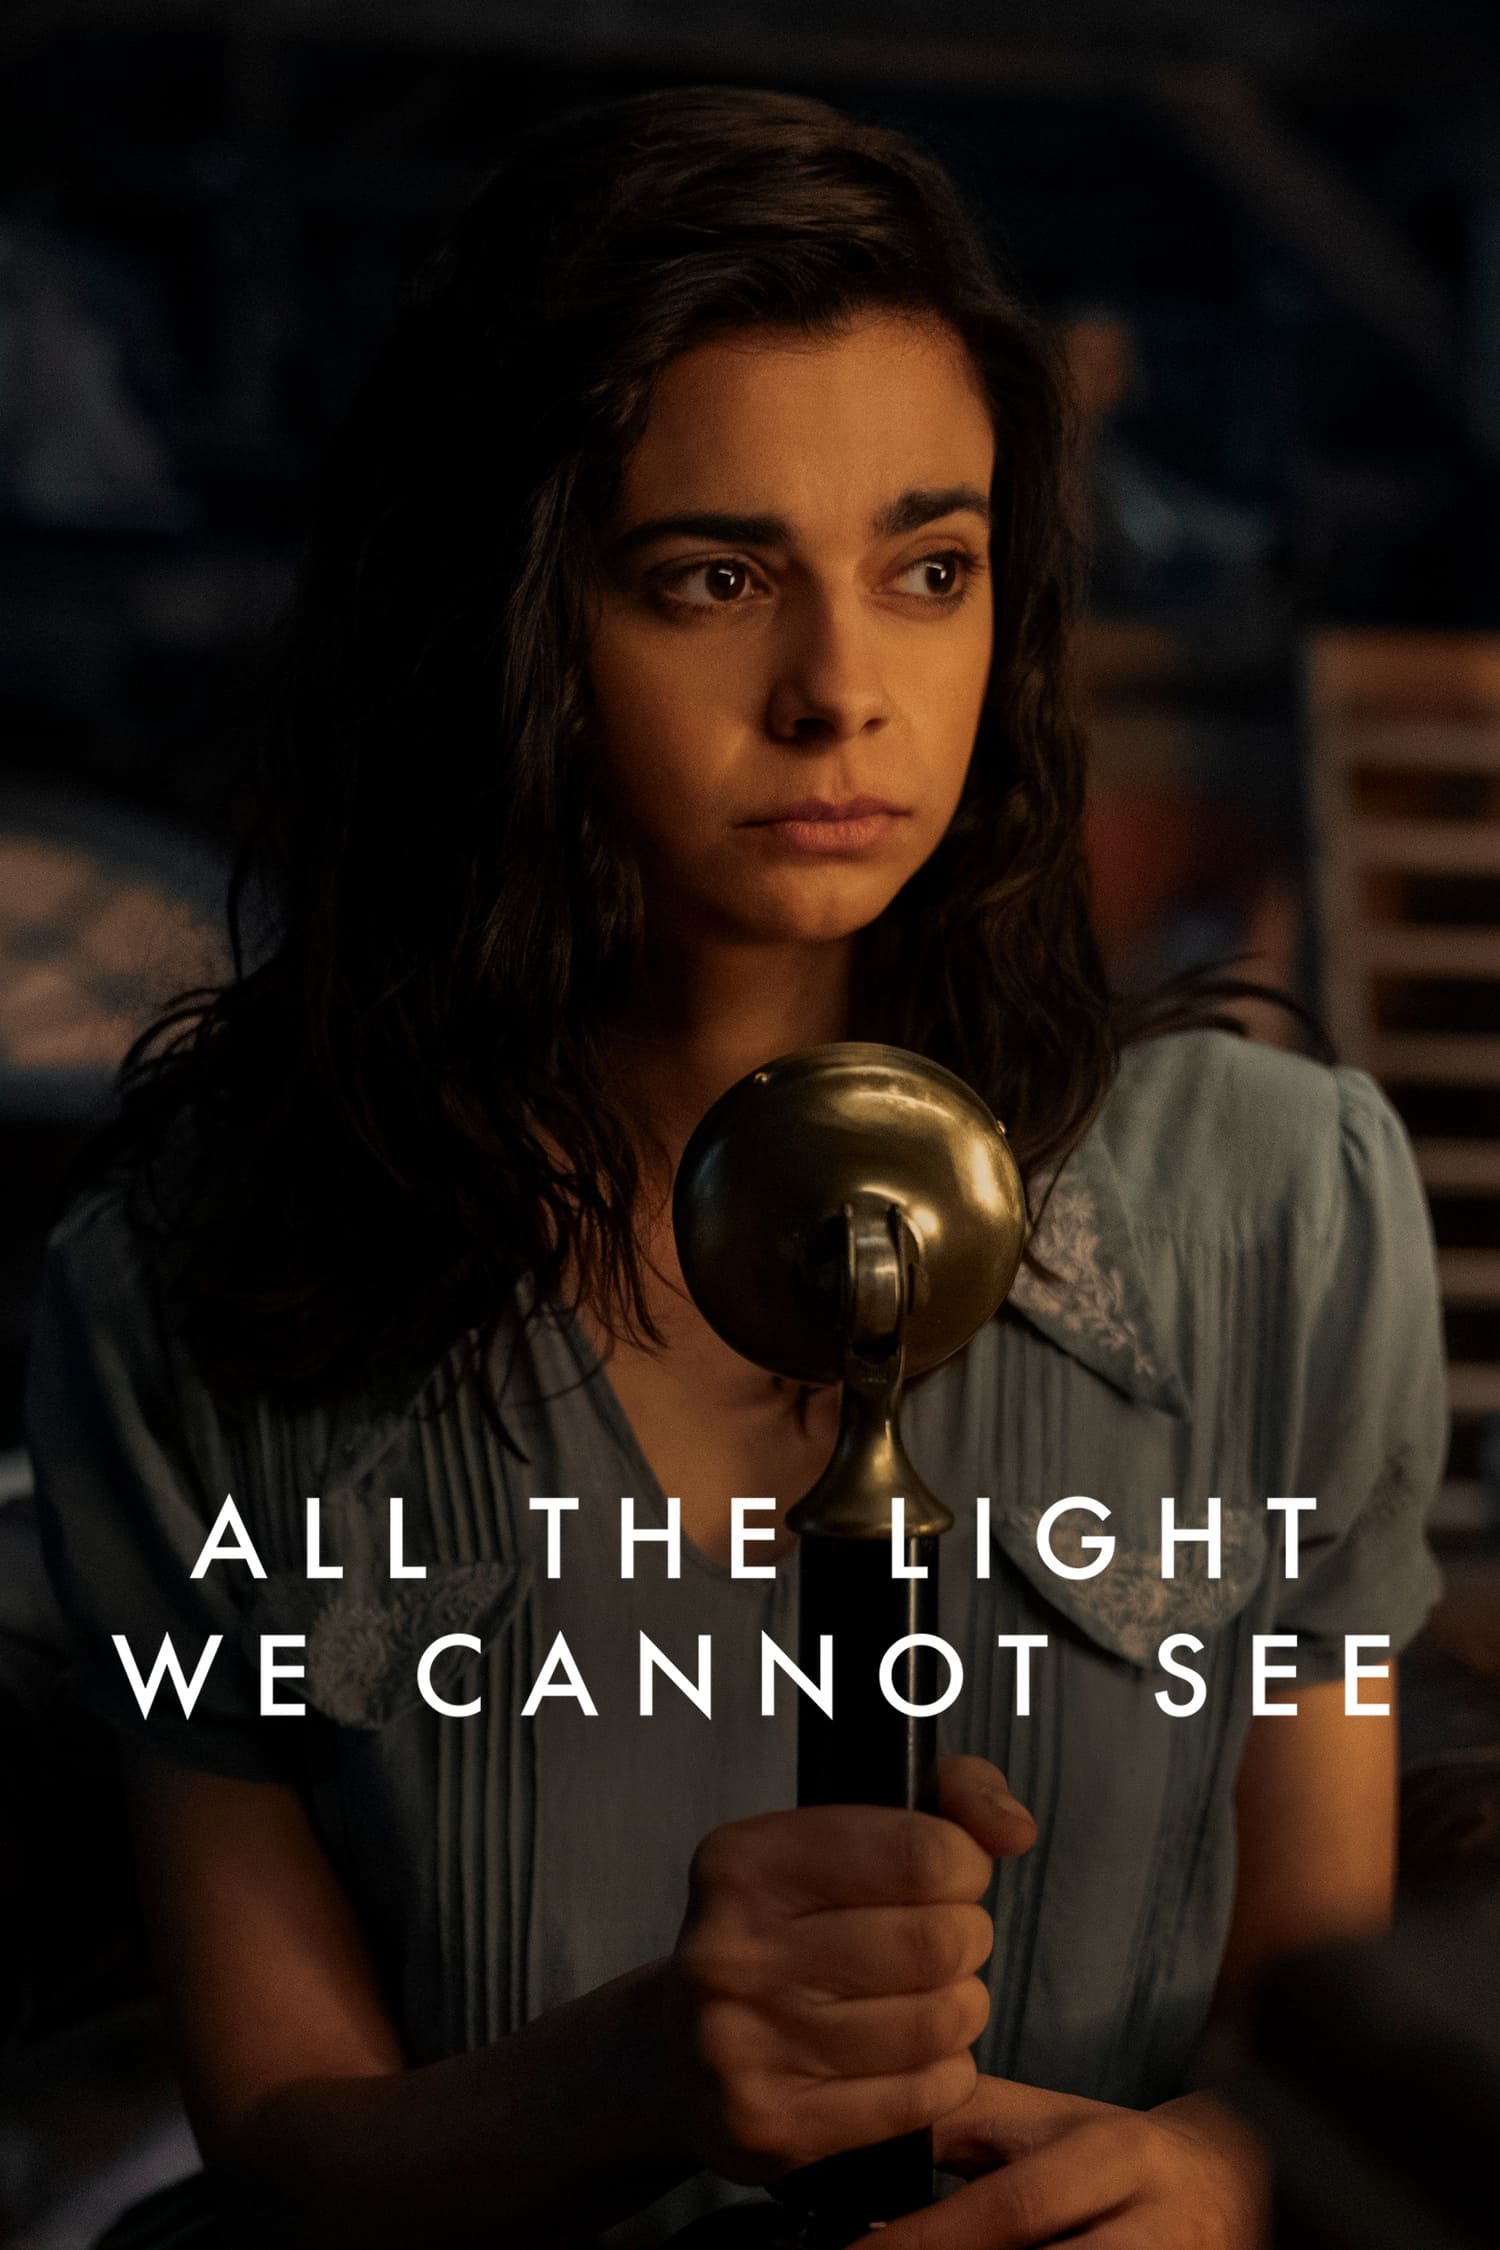 All the Light We Cannot See TV Shows About Based On Novel Or Book